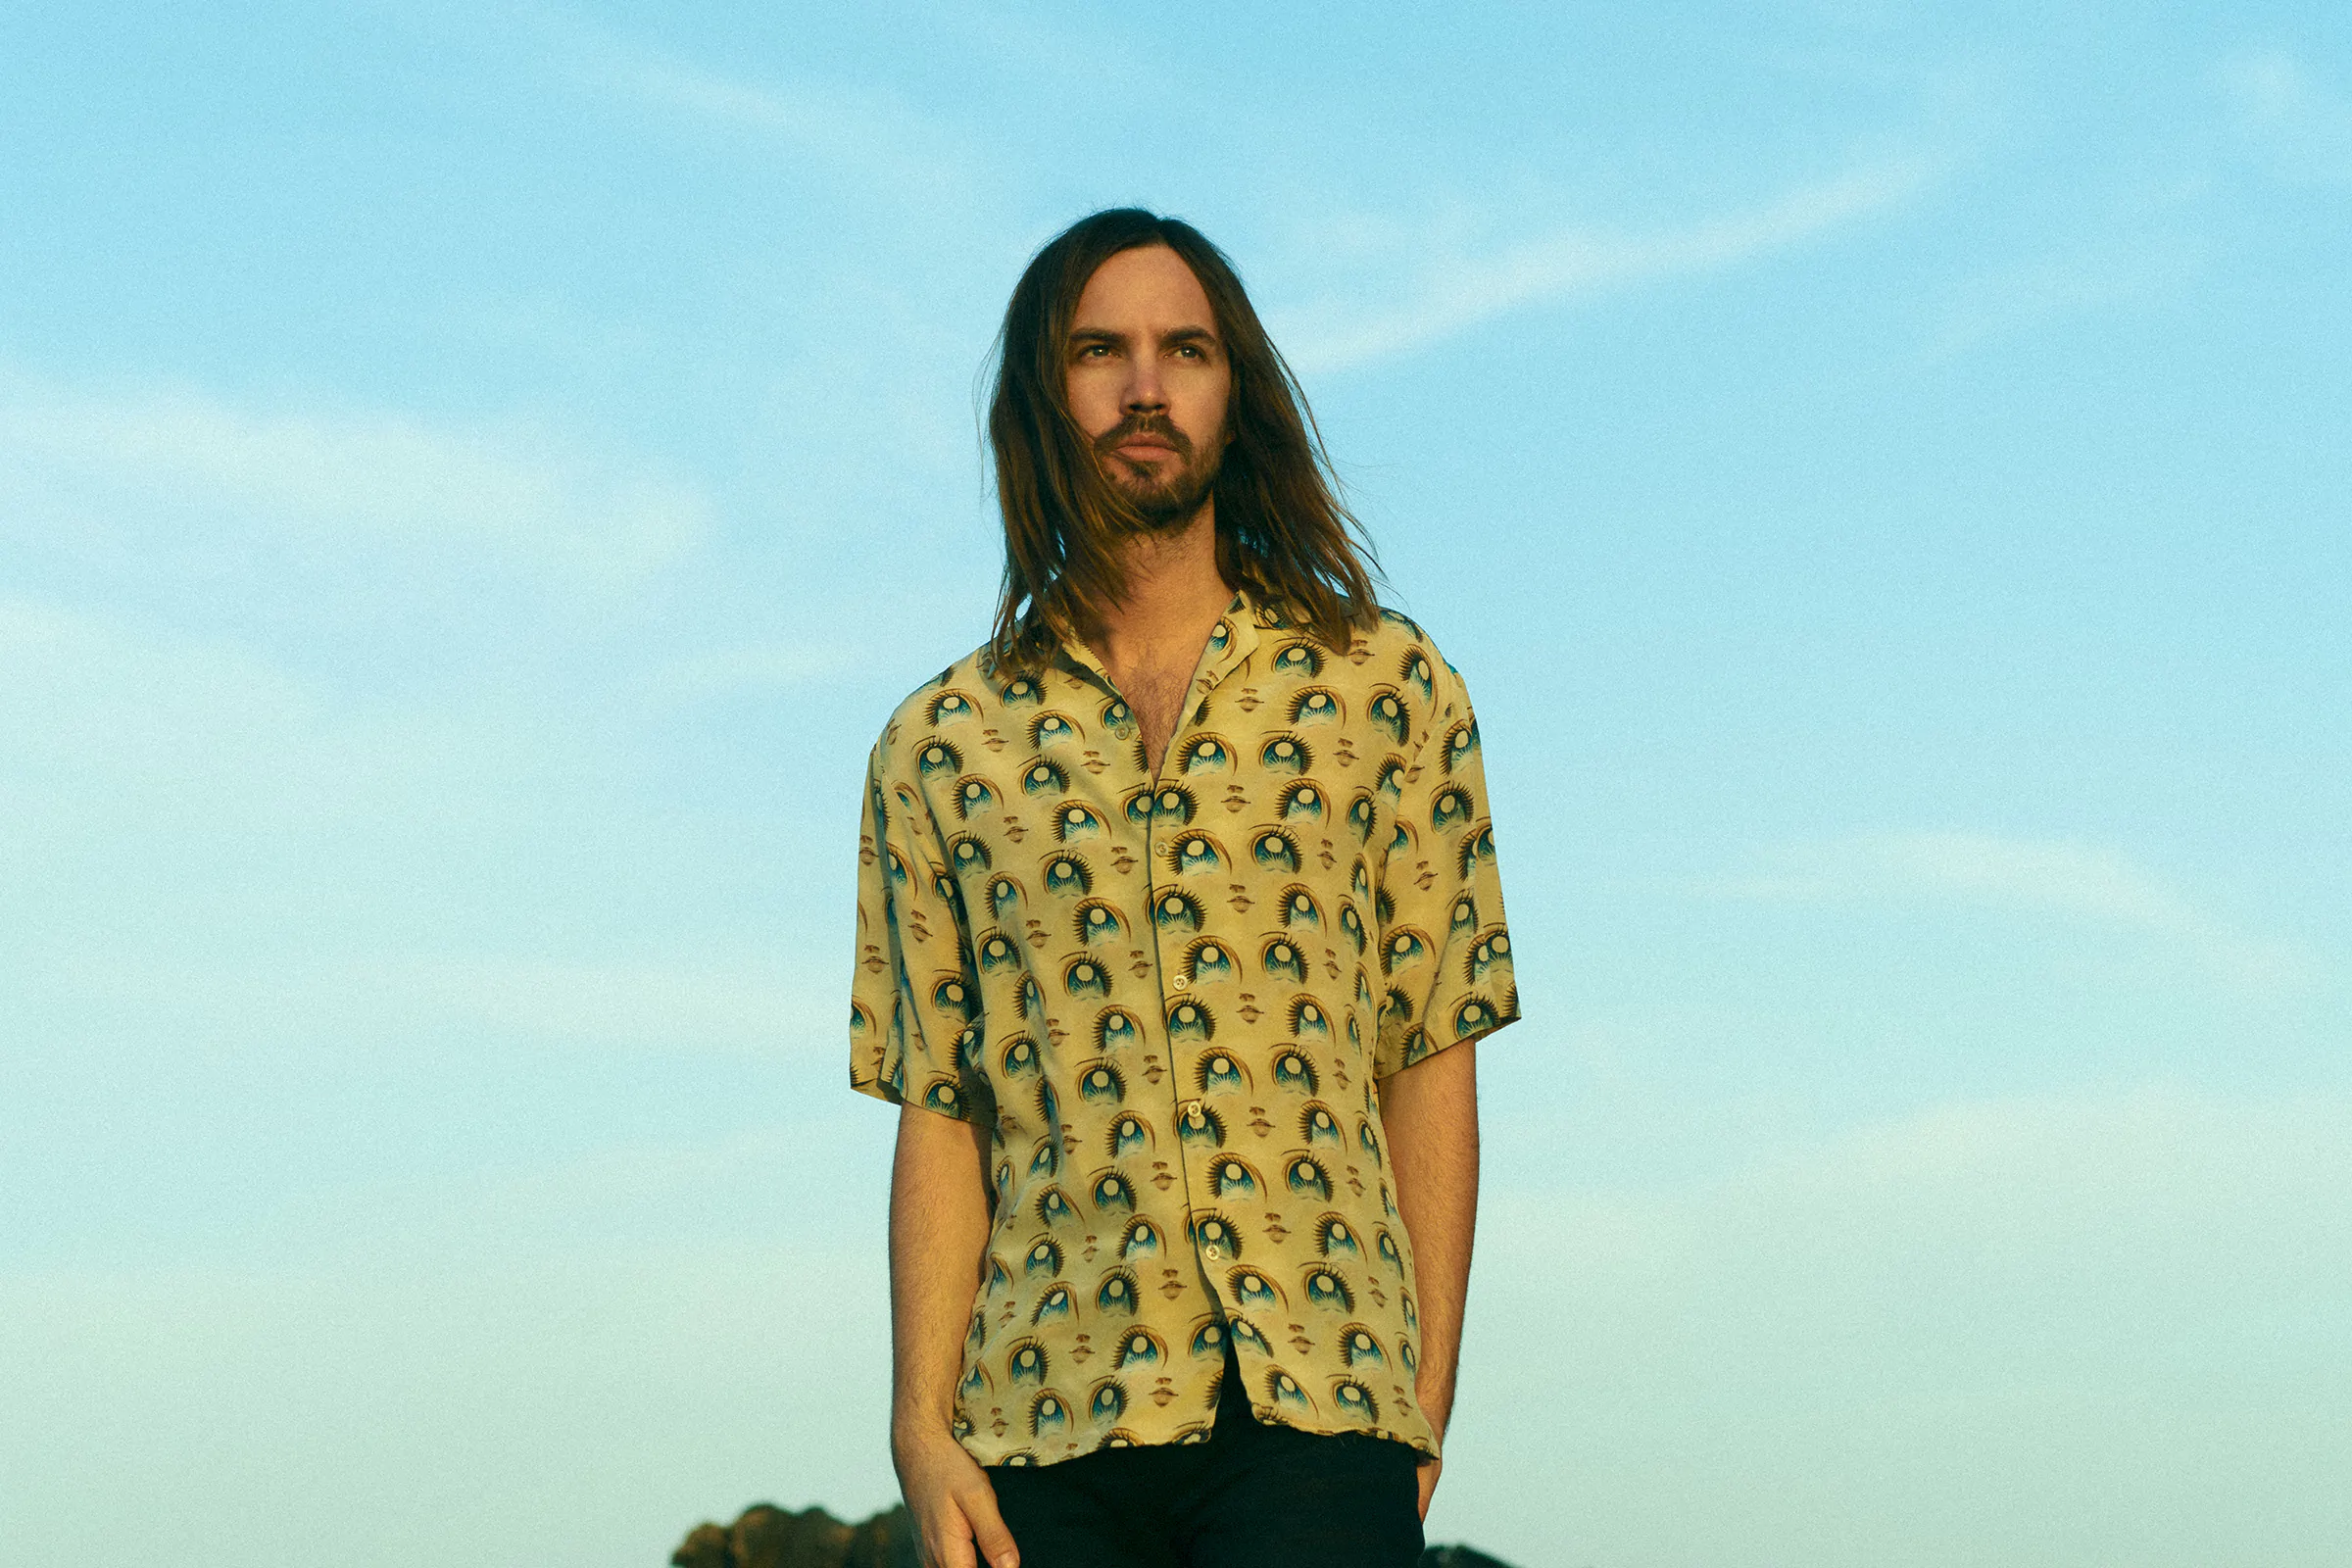 TAME IMPALA shares video for ‘Breathe Deeper’ – Watch Now!